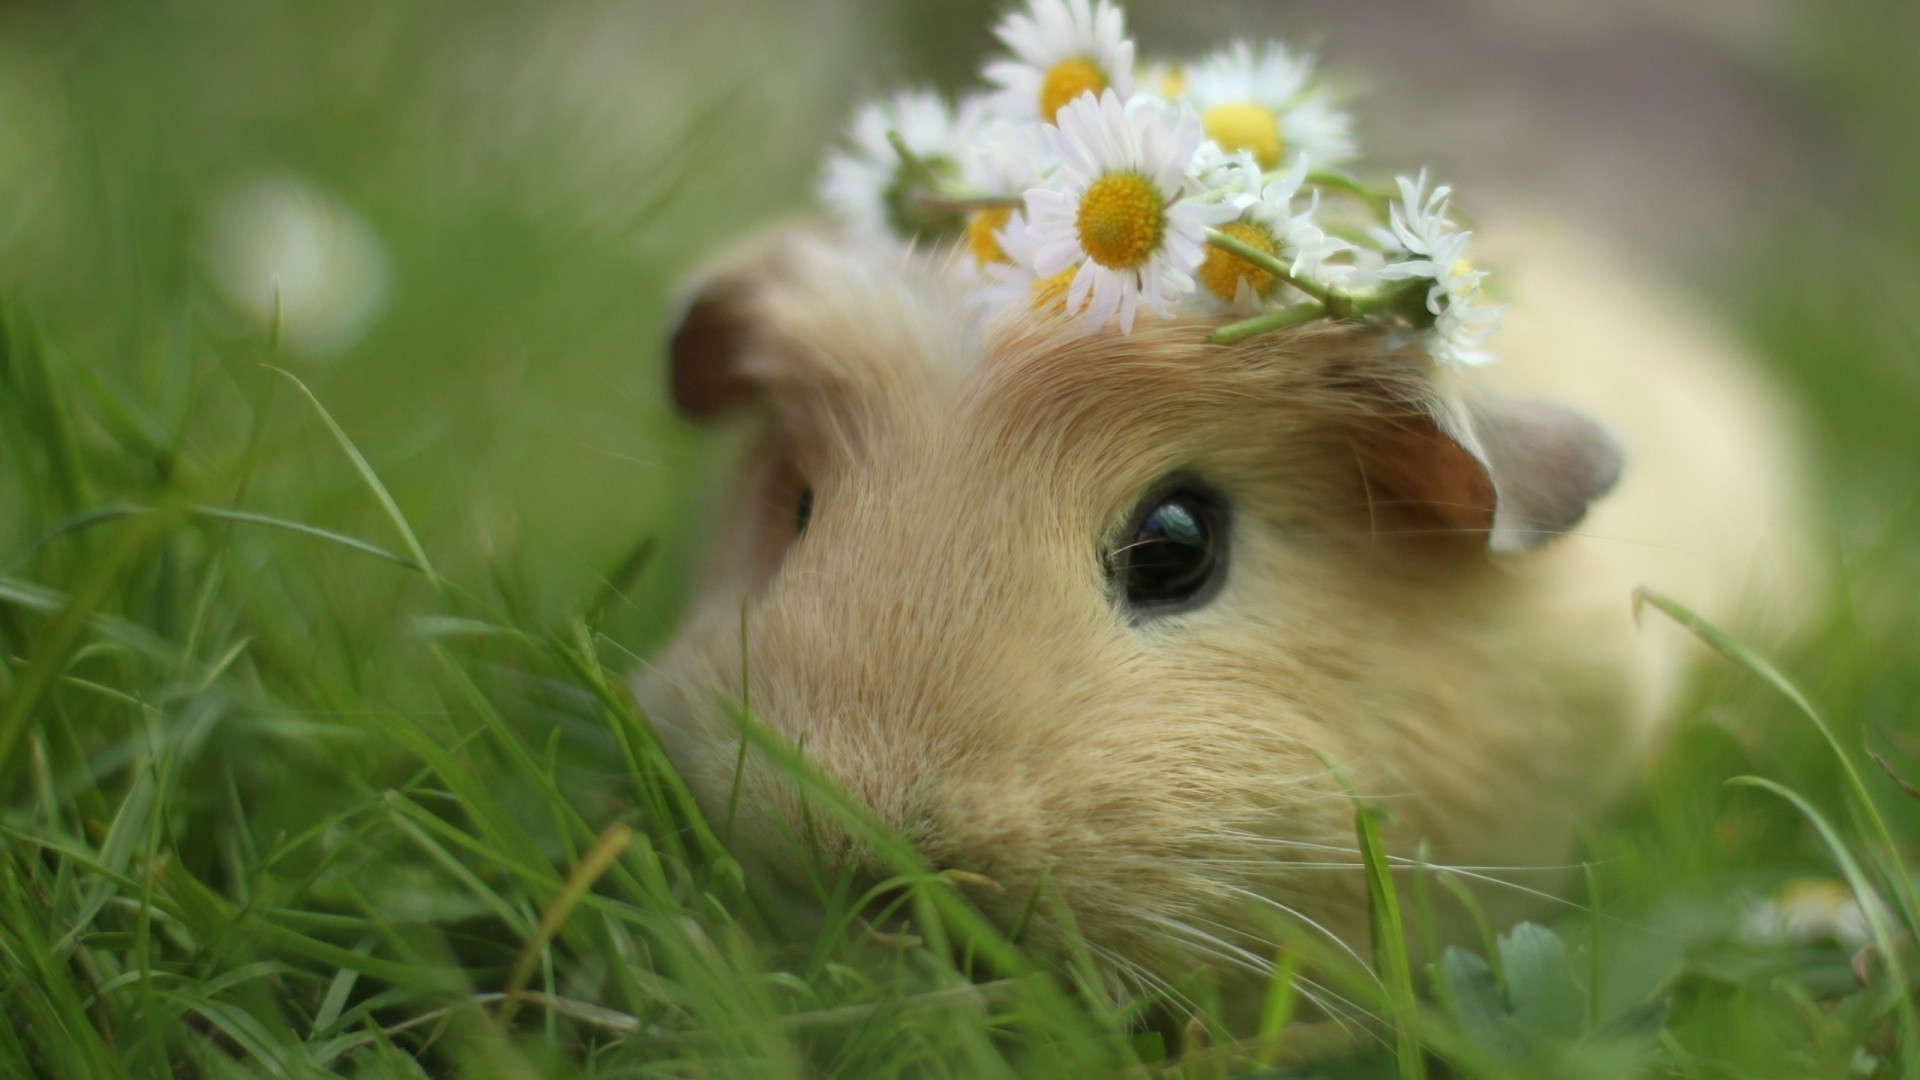 Wallpaper Cute Guinea Pigs HD 1080p Upload At August